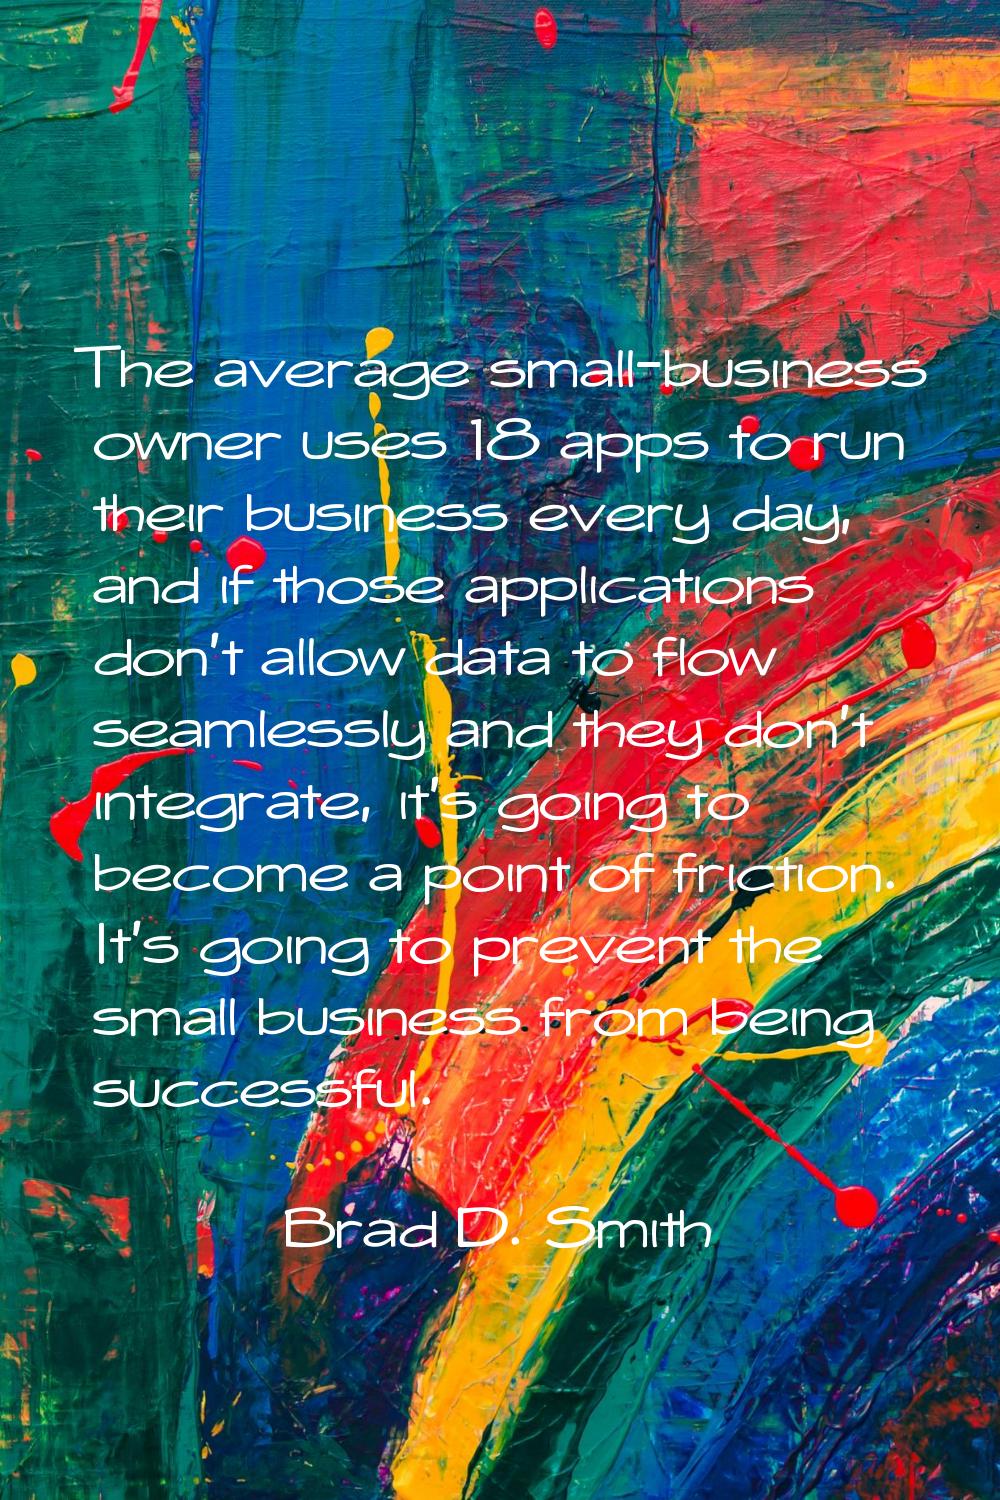 The average small-business owner uses 18 apps to run their business every day, and if those applica